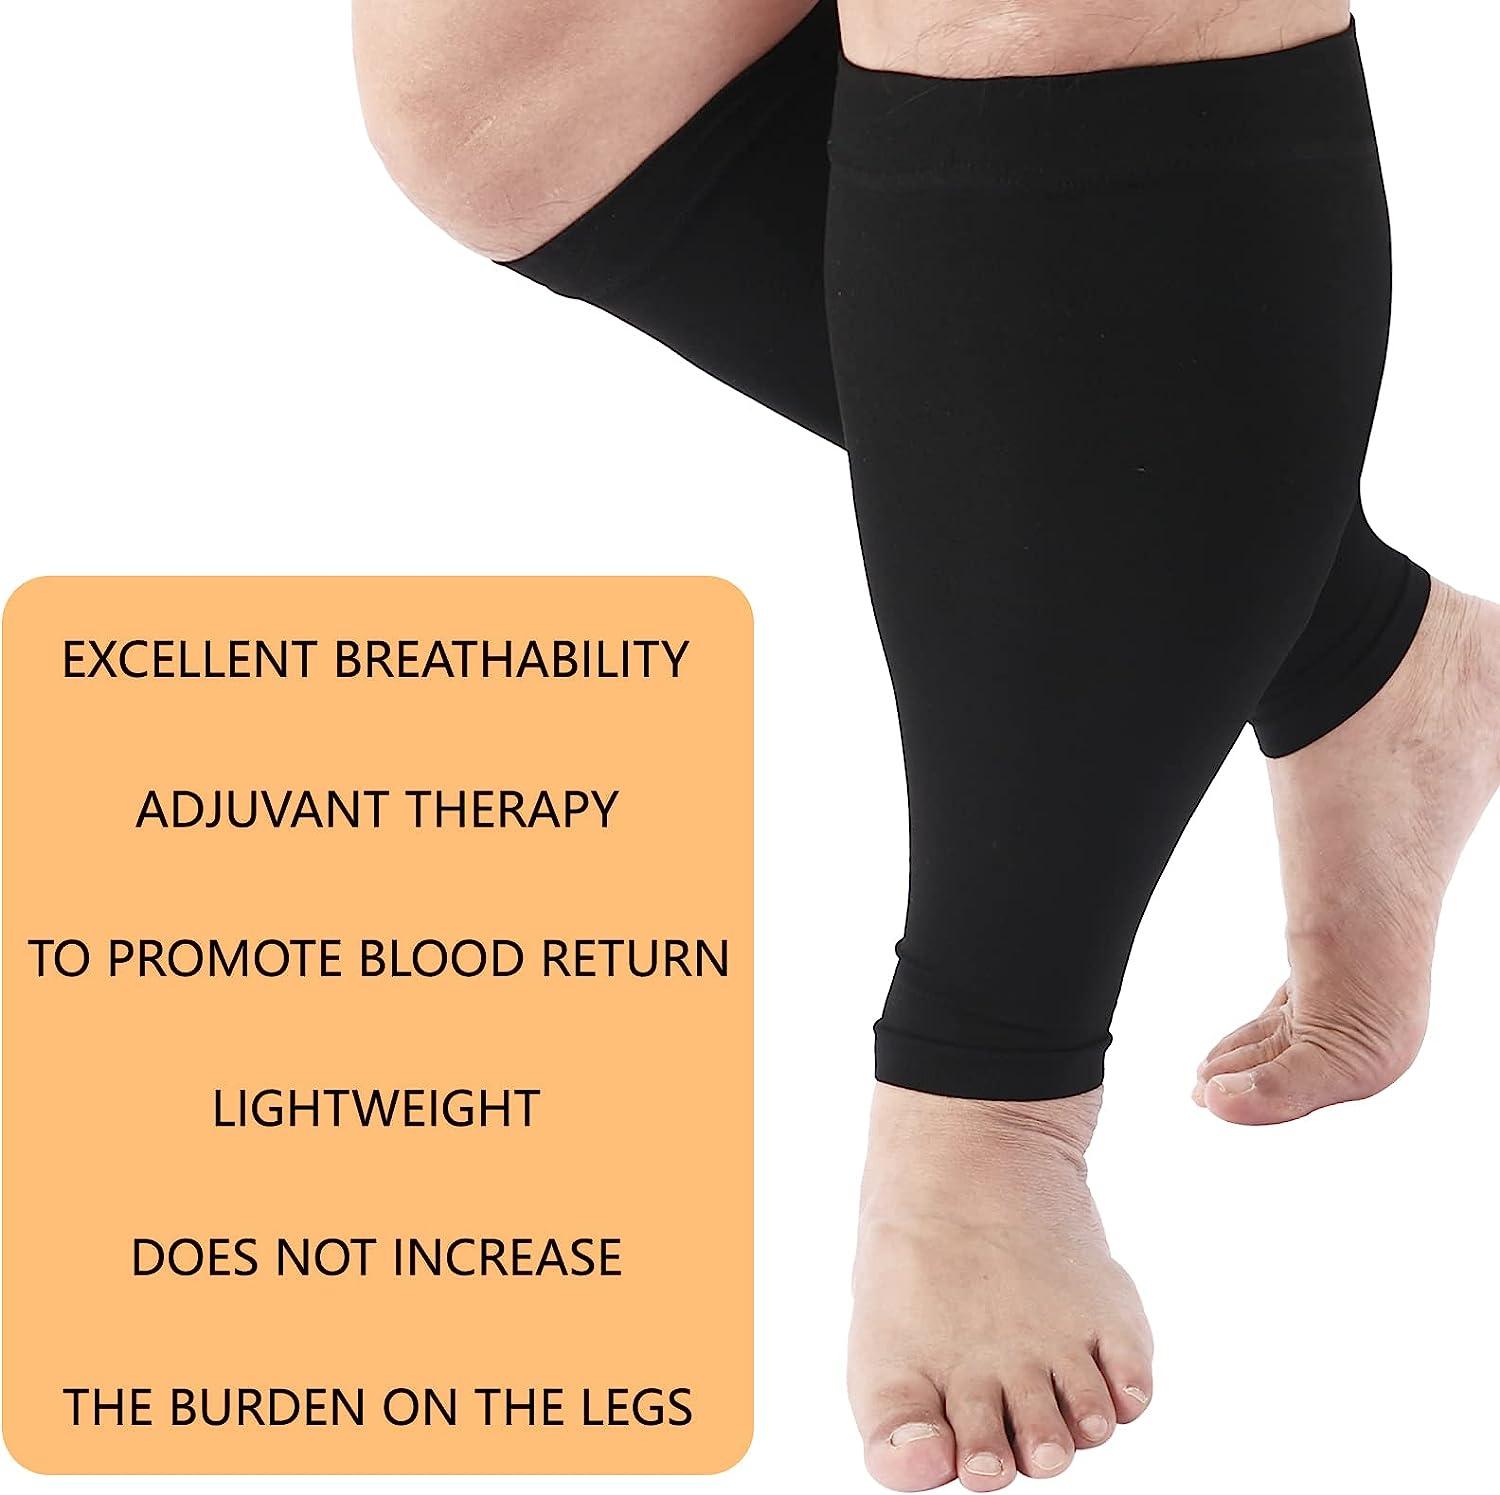 Plus Size Compression Sleeves for Calves Women Wide Calf